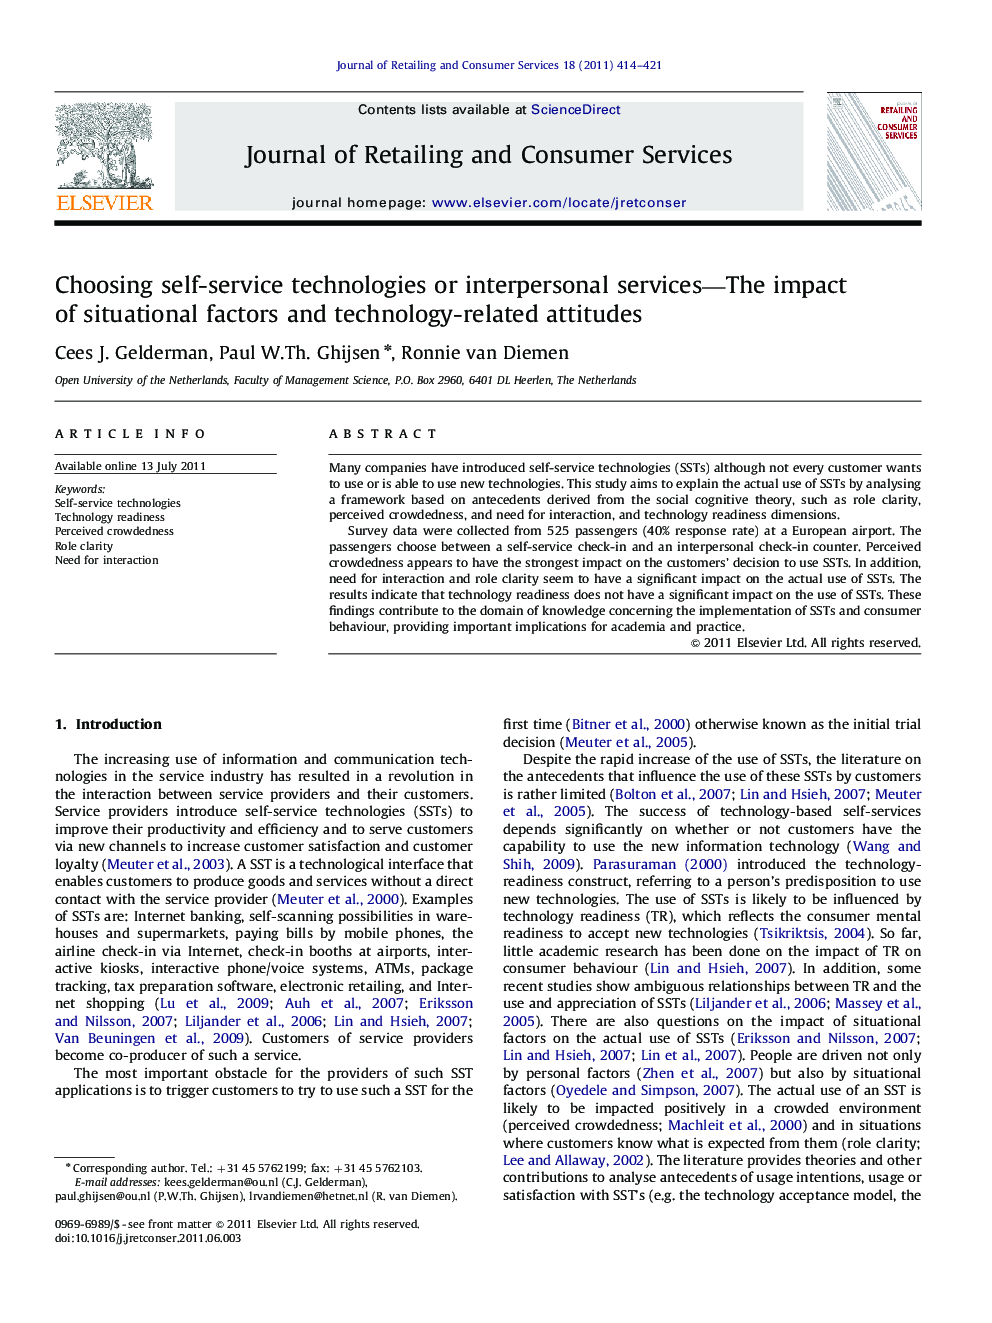 Choosing self-service technologies or interpersonal services—The impact of situational factors and technology-related attitudes